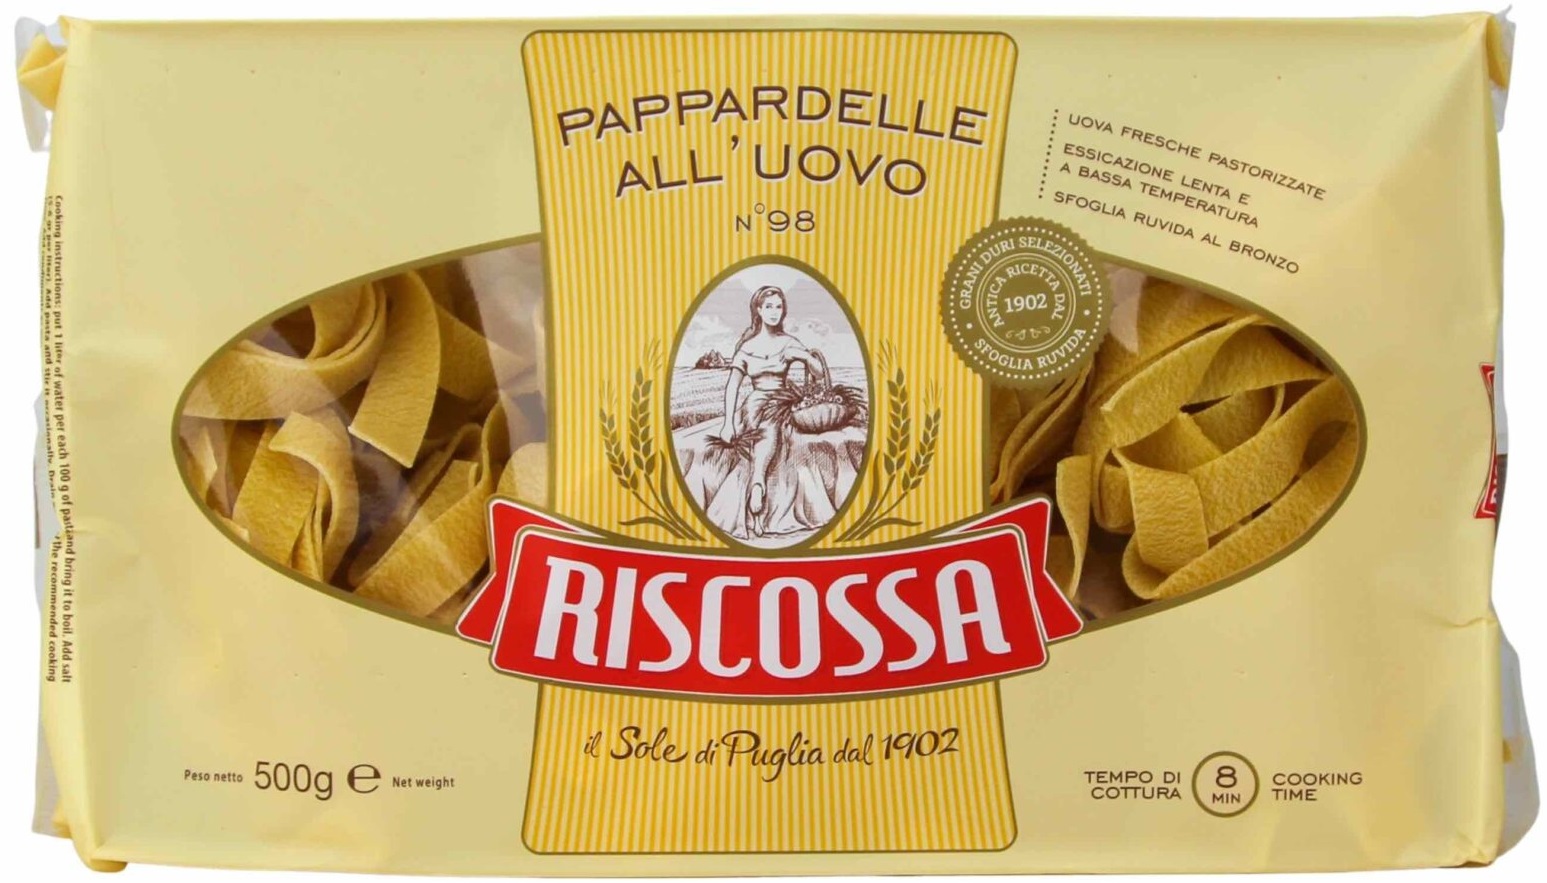 Pappardelle n°98, 500 g